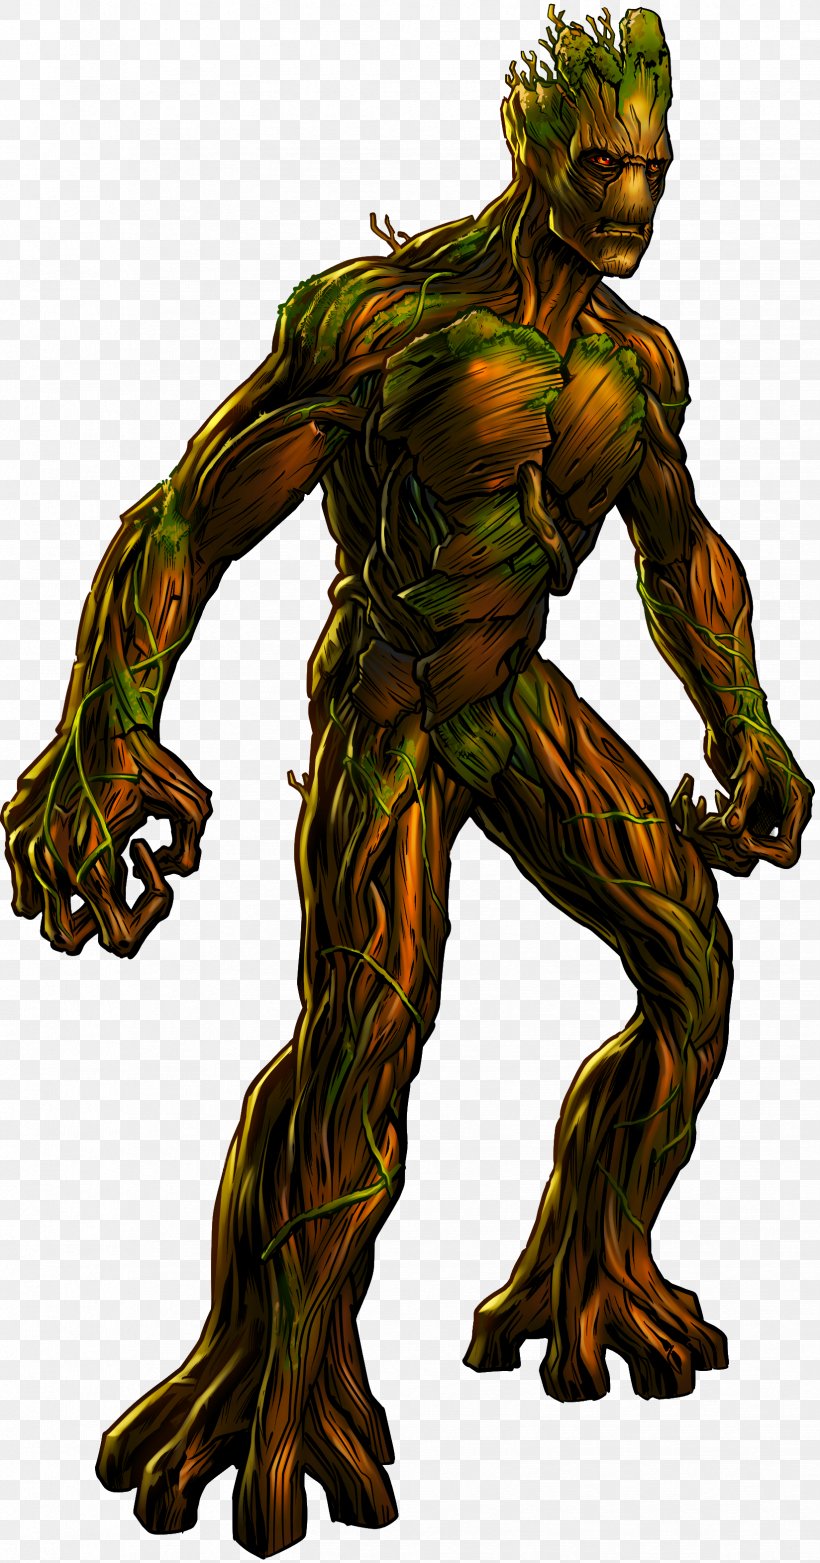 Baby Groot Rocket Raccoon Drax The Destroyer Marvel: Avengers Alliance, PNG, 1648x3142px, Groot, Baby Groot, Character, Comics, Drax The Destroyer Download Free